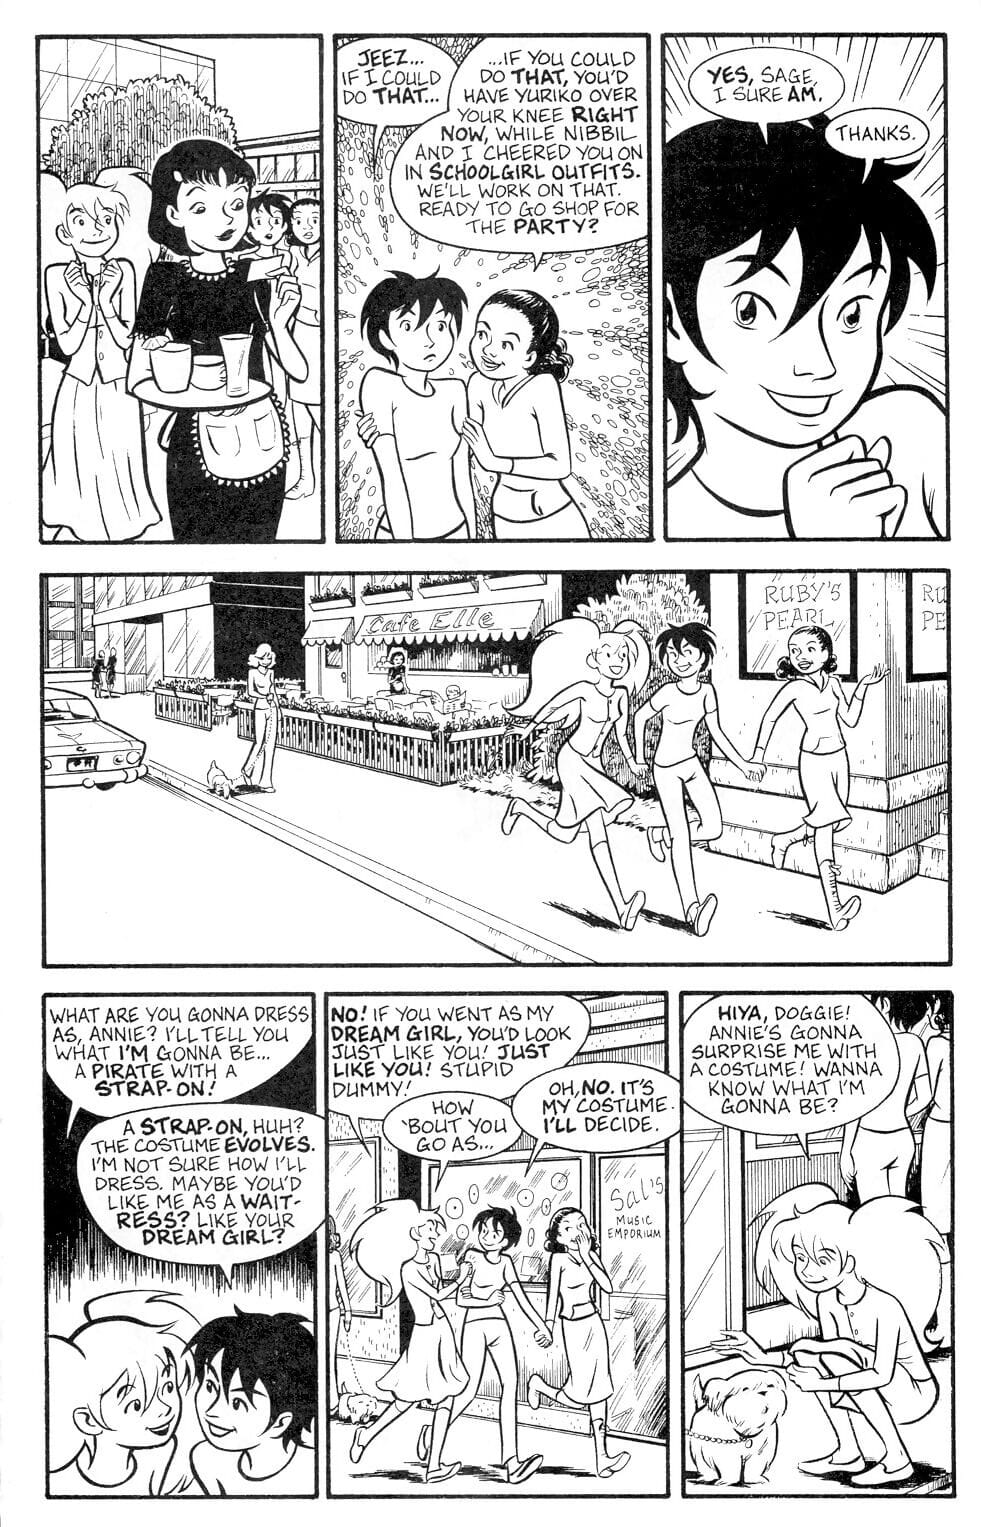 Small Favors Issue #6 ENG page 1